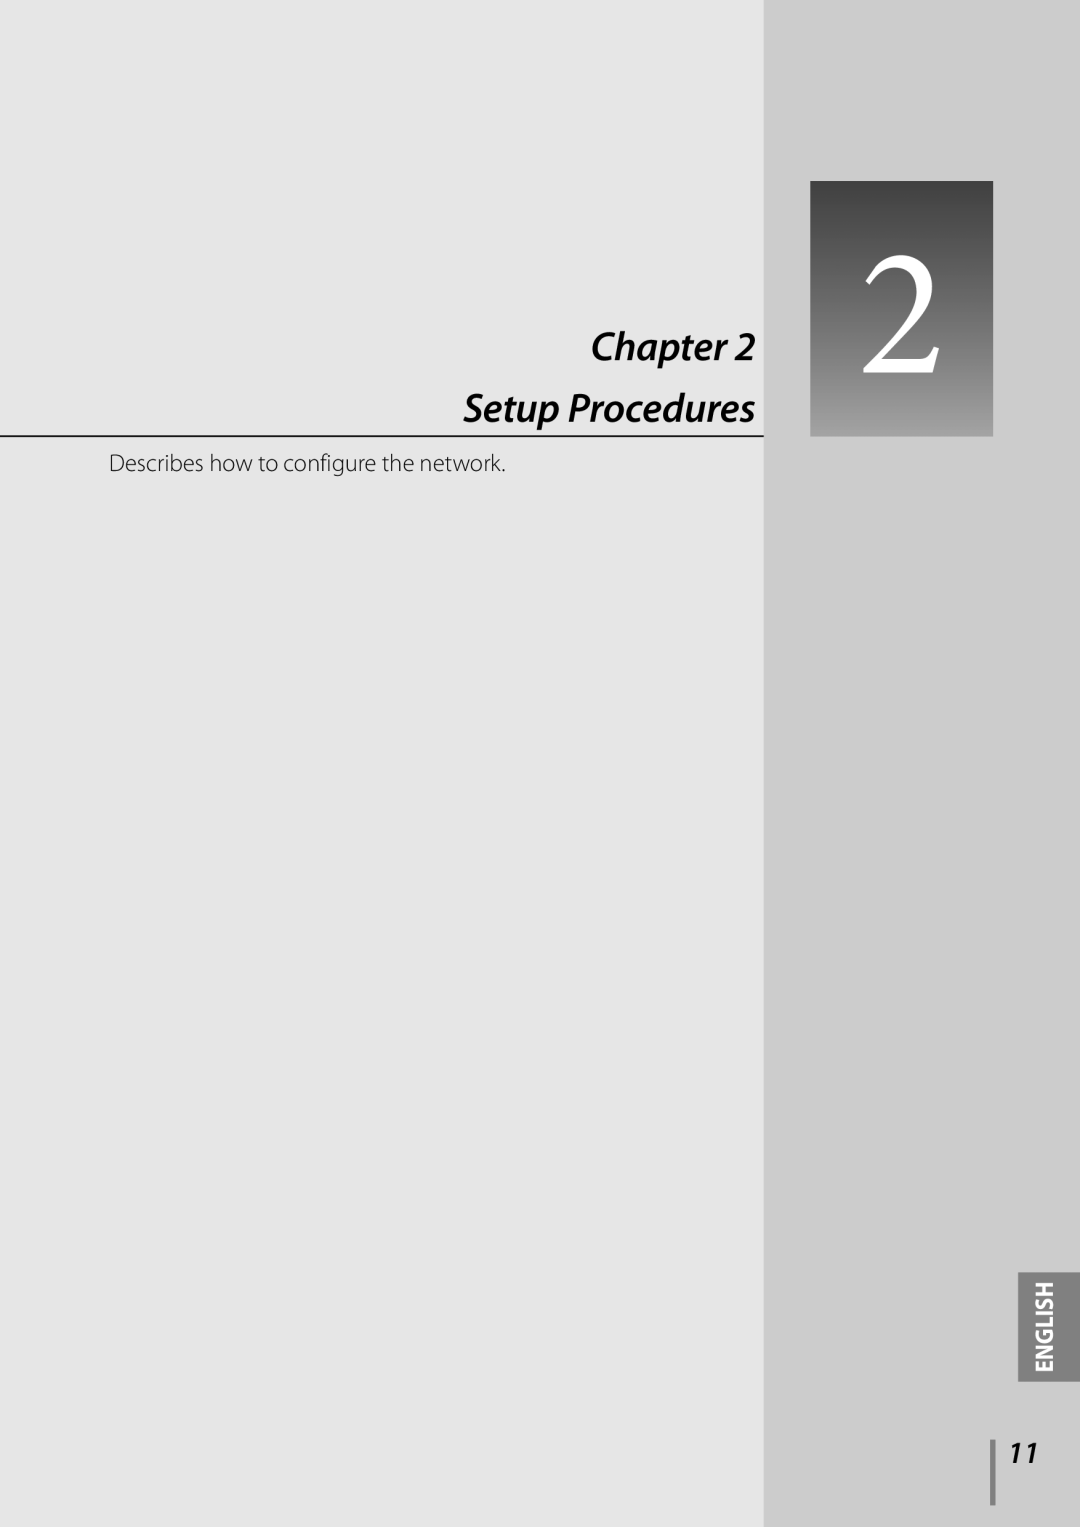 Sanyo Proj05 owner manual Chapter, Setup Procedures, Describes how to configure the network, English 